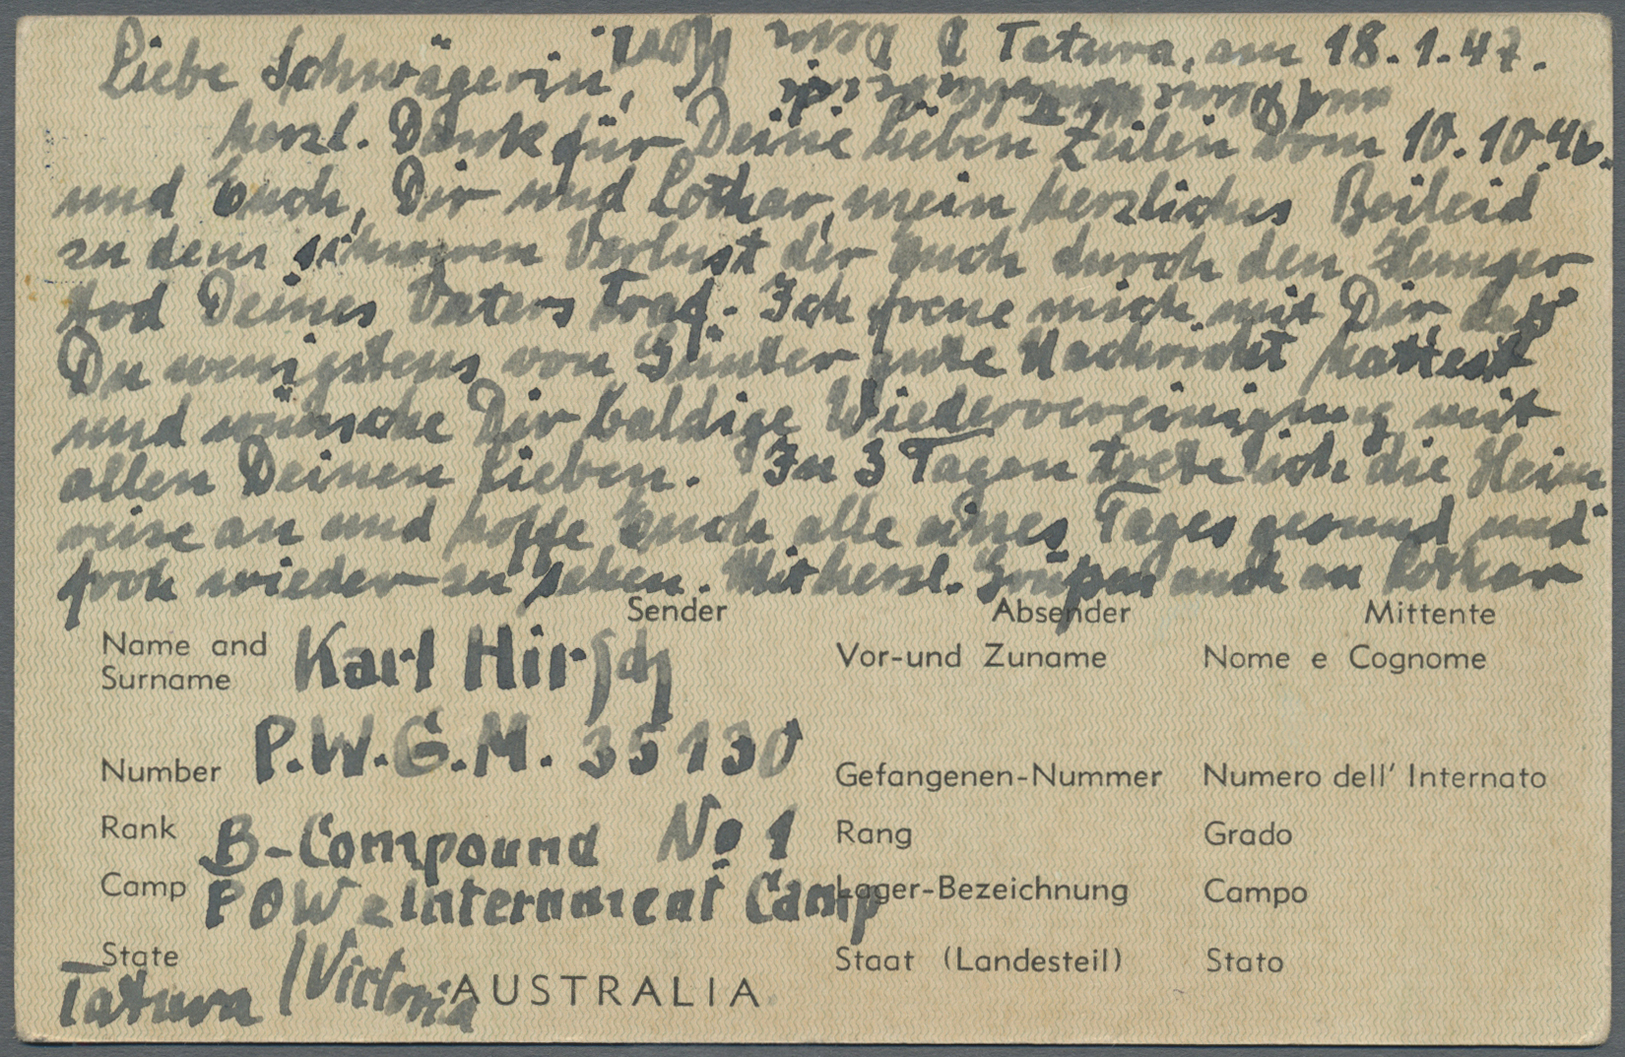 GA Australien - Ganzsachen: 1947 (21.1.), POW Airmail Postcard 6d Blue Used From Melbourne (B-Compound No.1 Tatura) To P - Postal Stationery